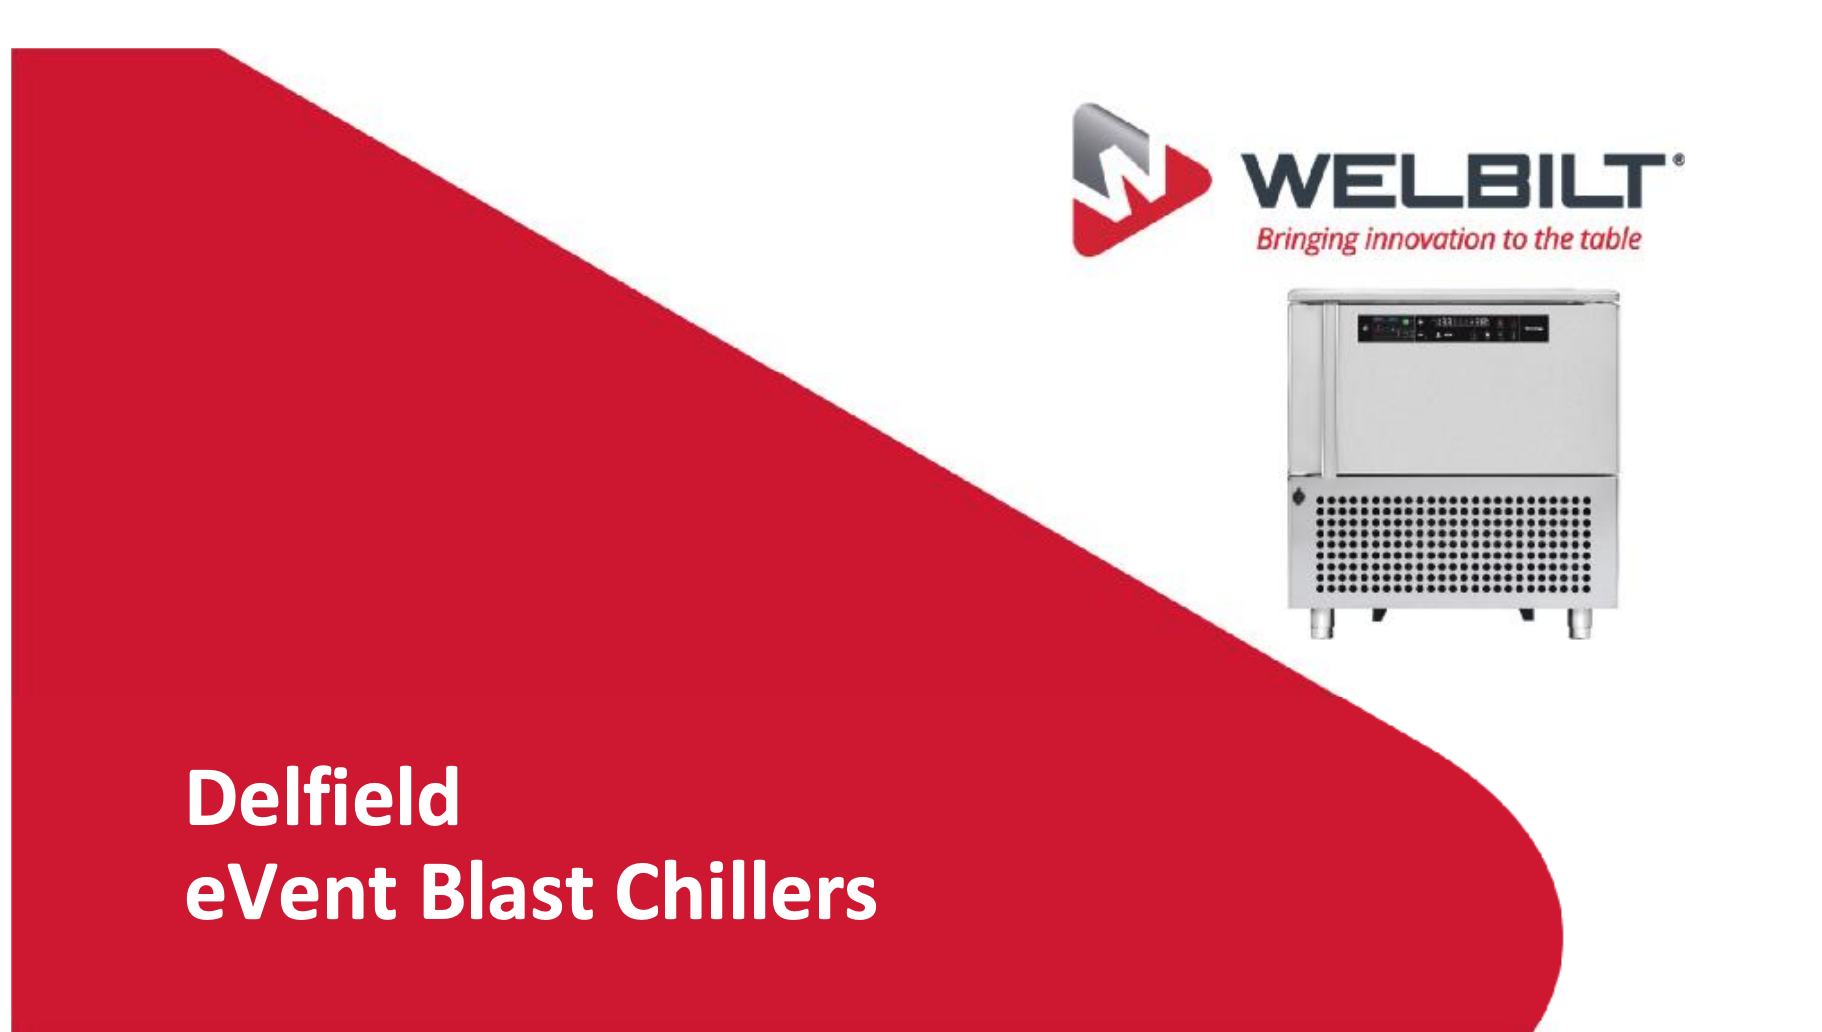 A Quick Look at the Benefits of Delfield Blast Chillers